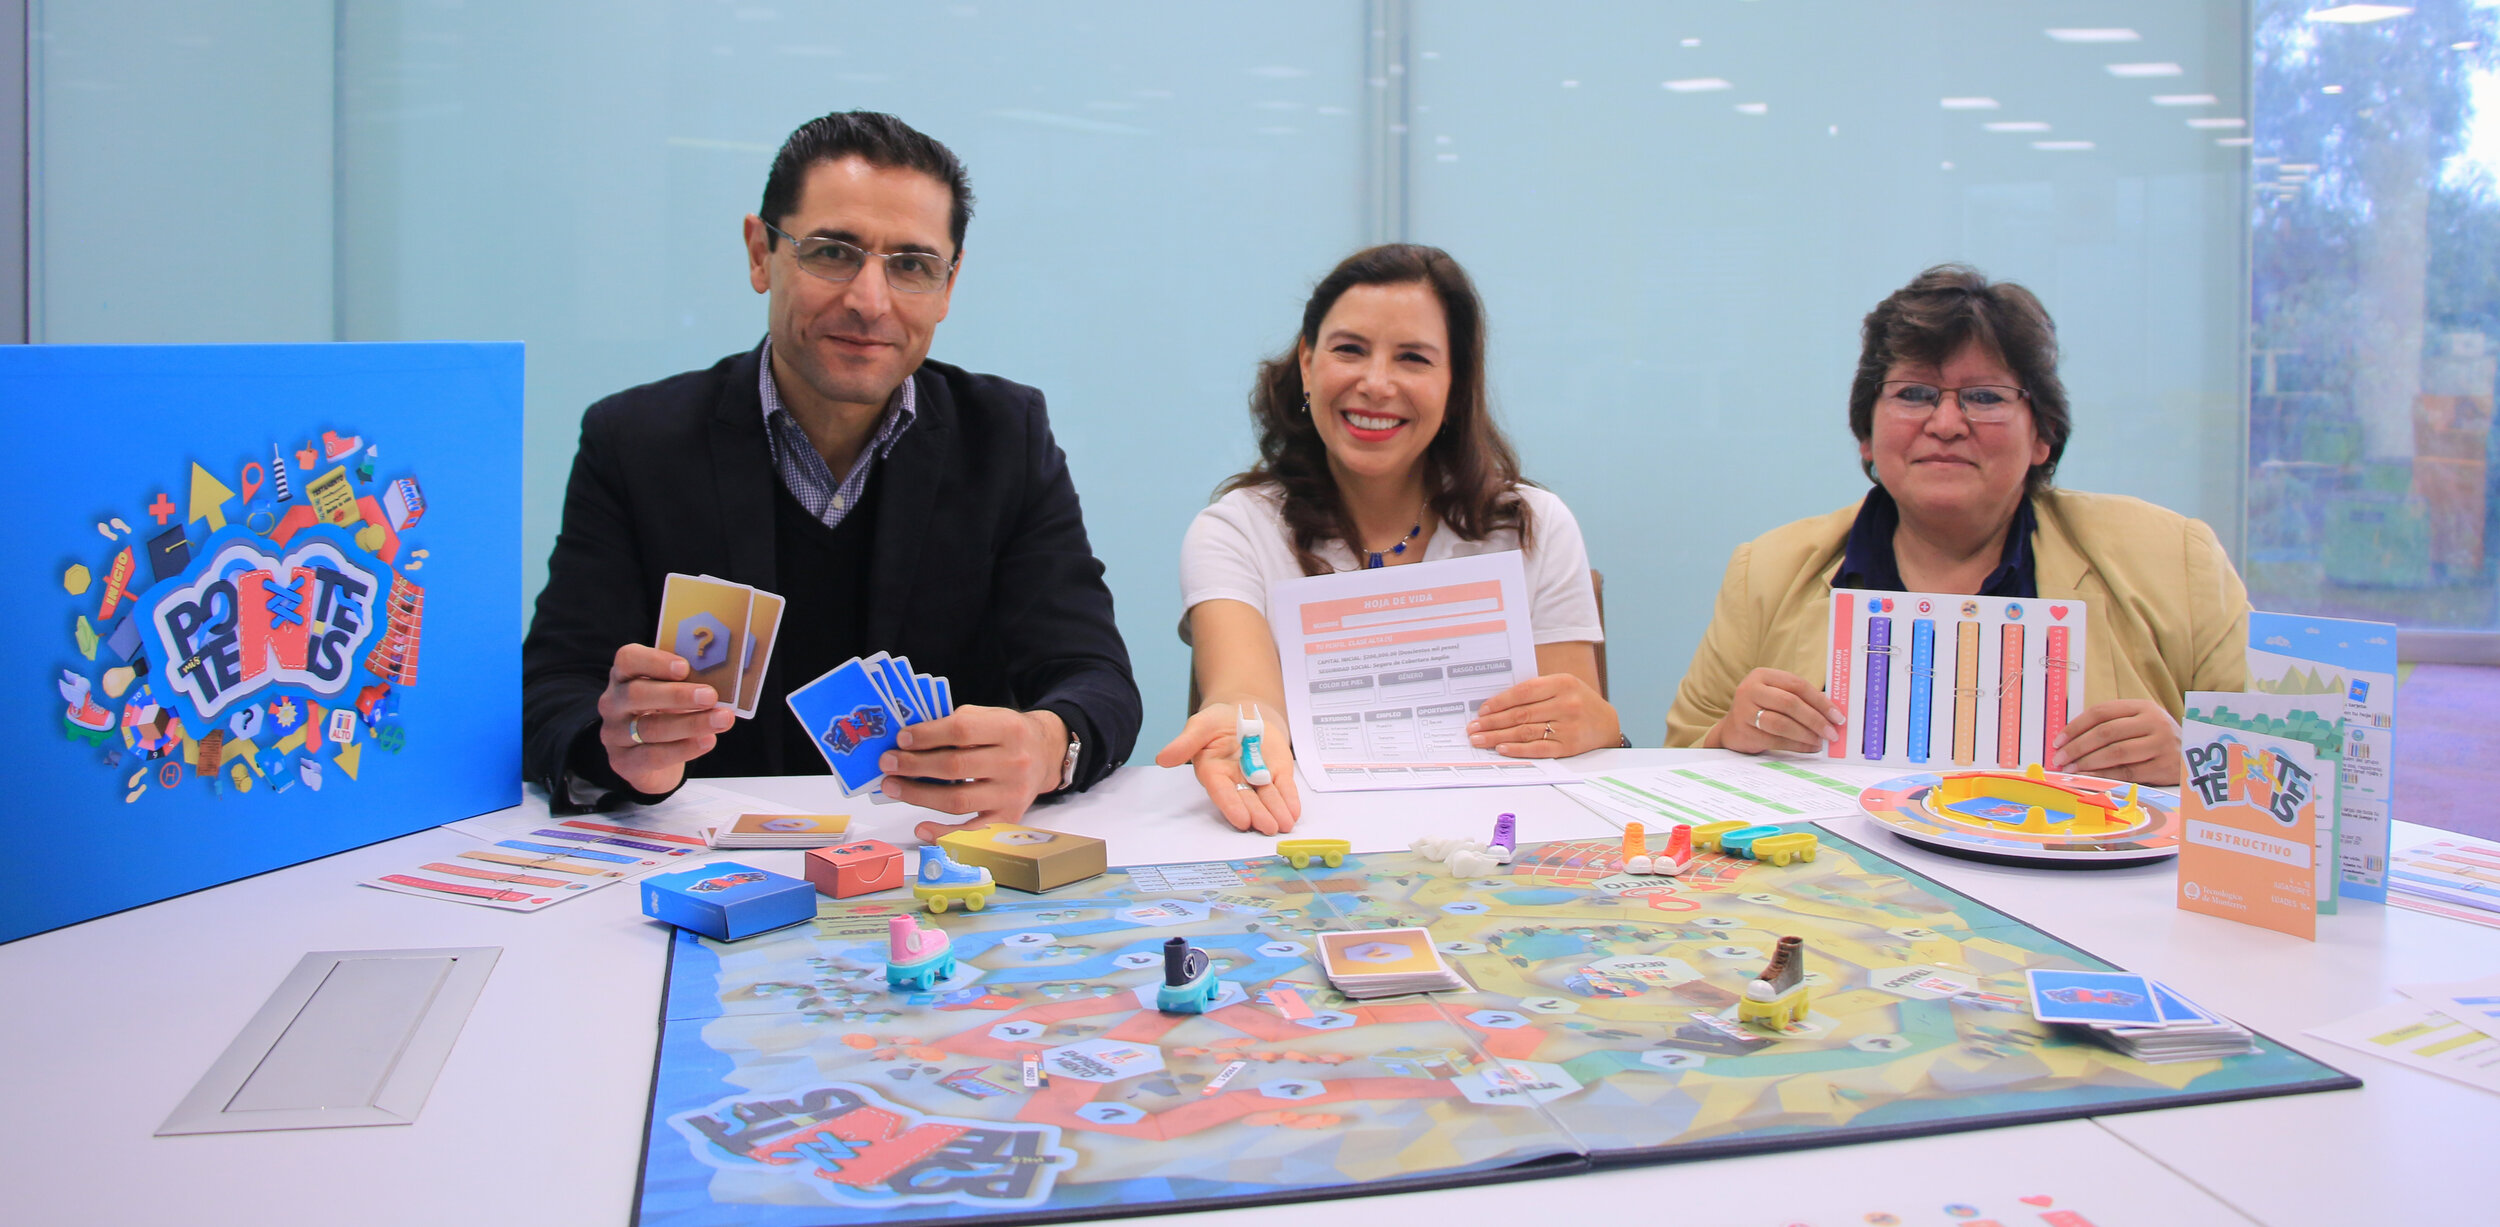 “Ponte N mis Tenis”: a board game to learn ethical awareness and citizenship